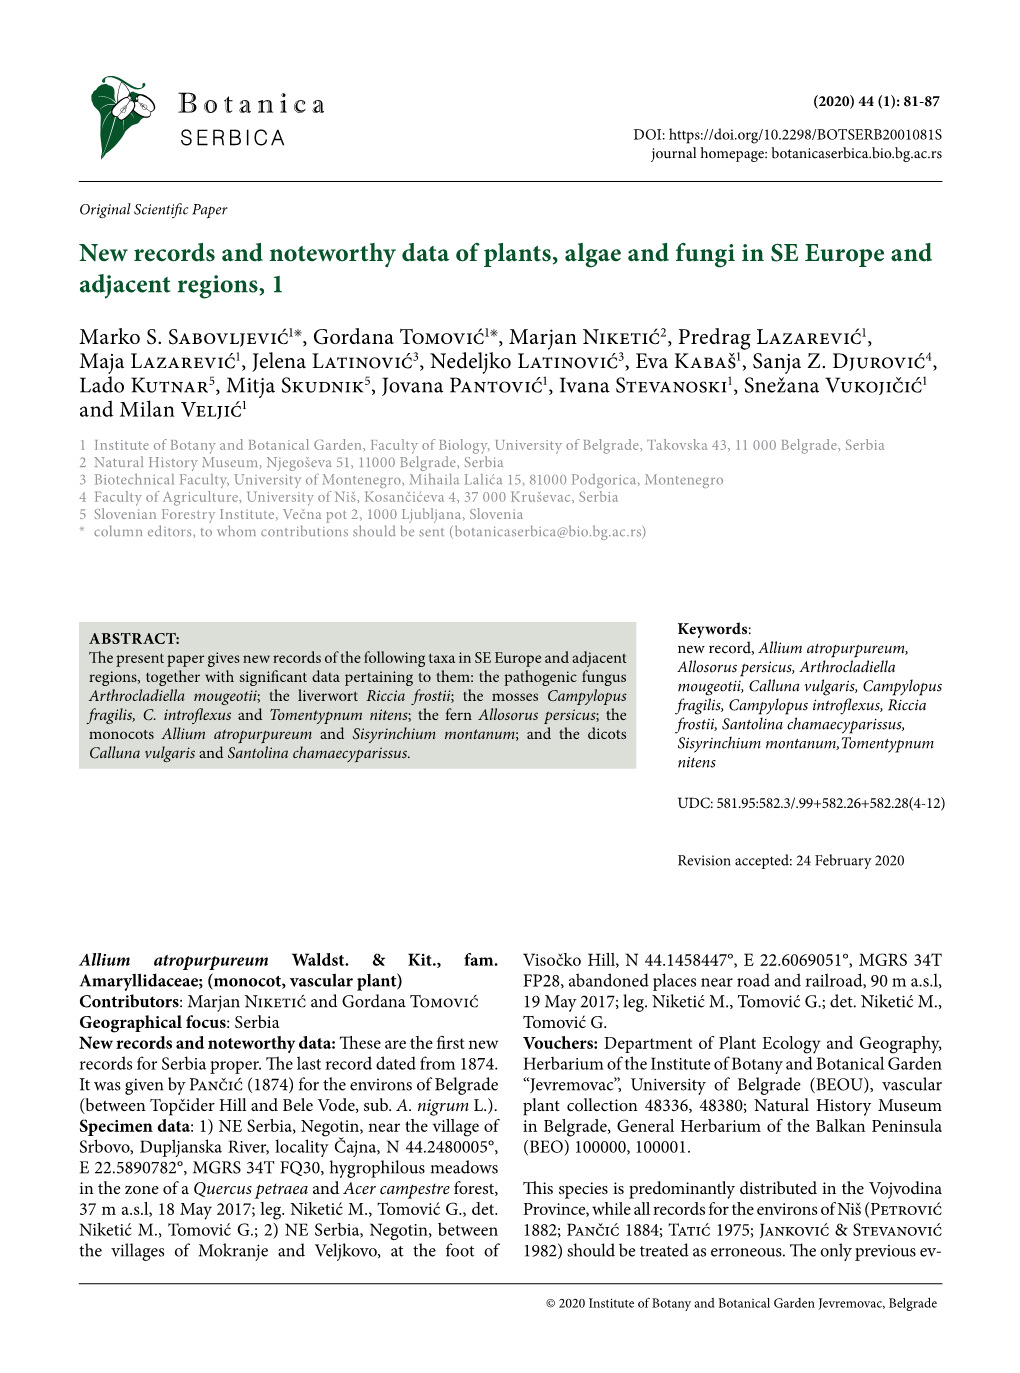 New Records and Noteworthy Data of Plants, Algae and Fungi in SE Europe and Adjacent Regions, 1